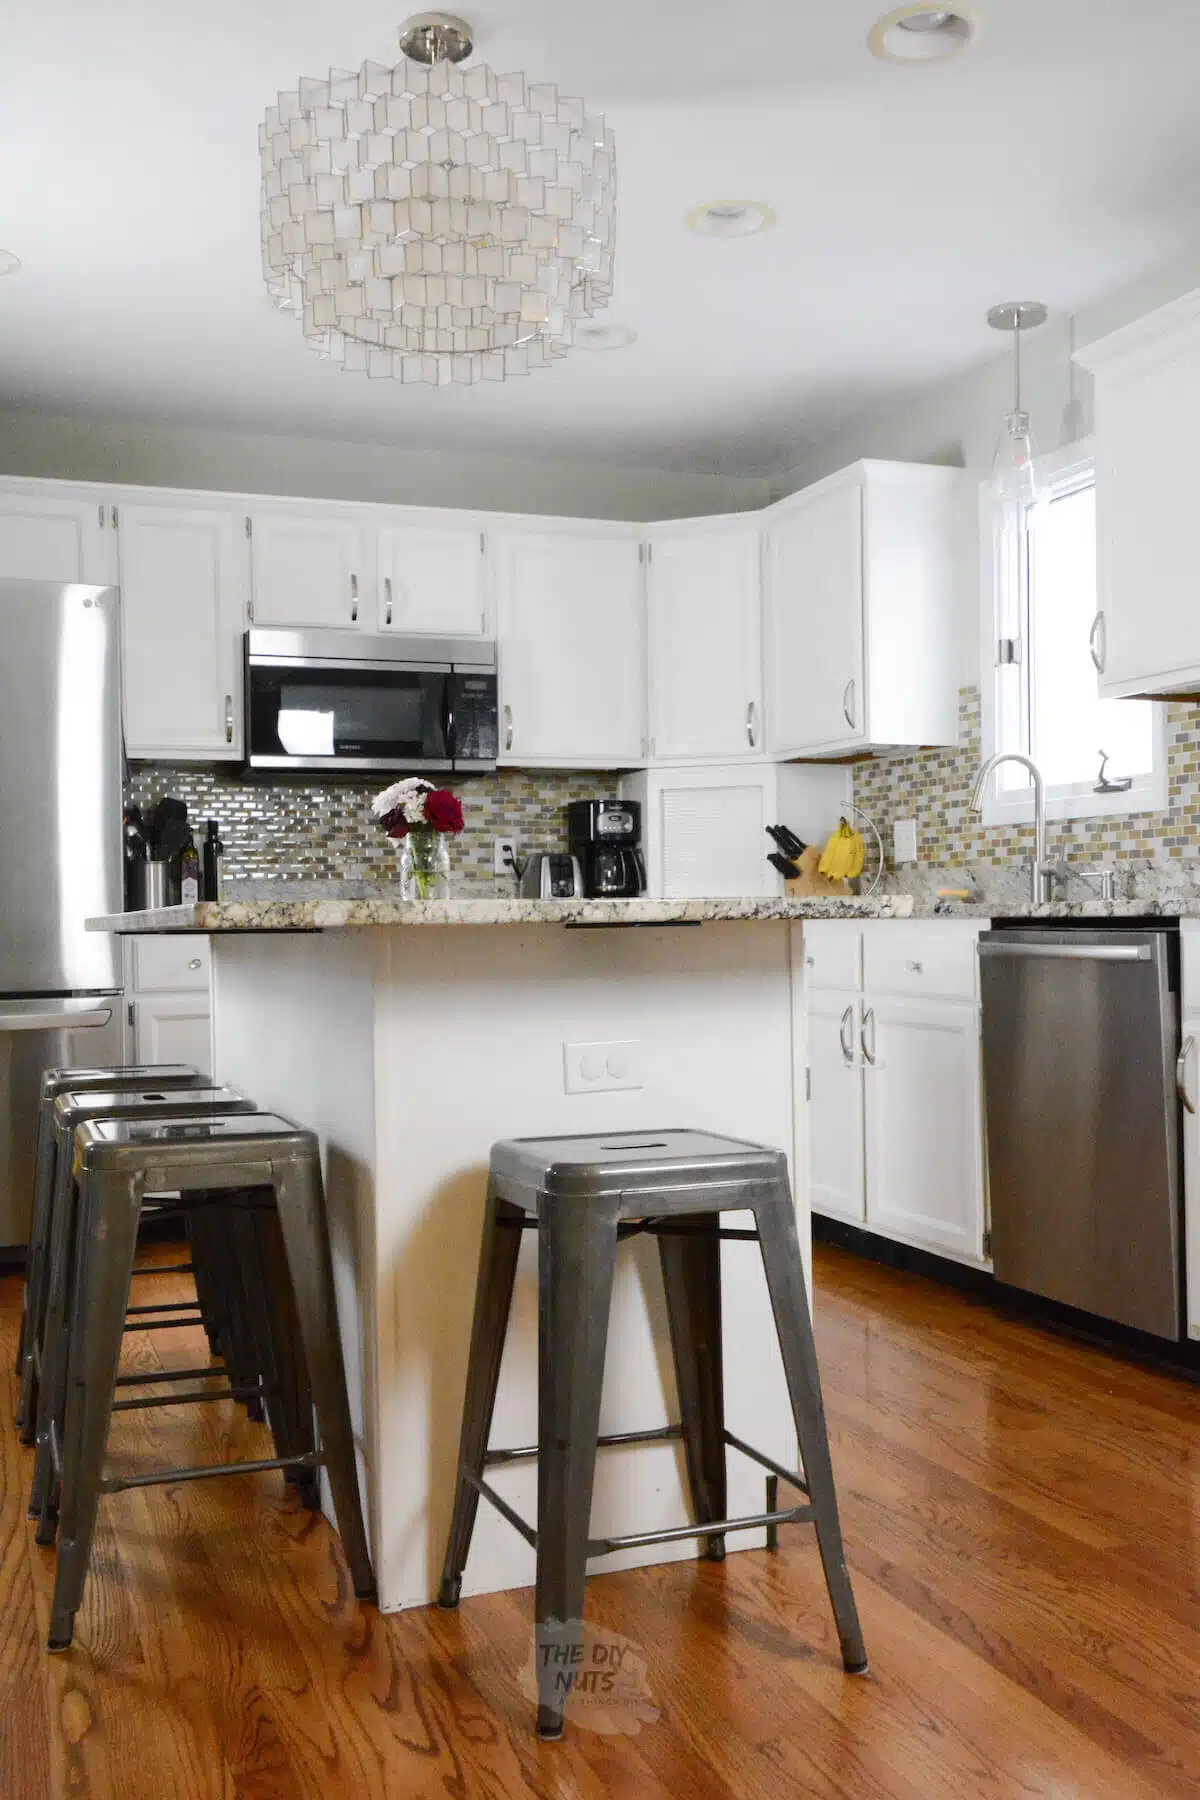 painted white kitchen cabinets with glass mosaic backsplash and capiz shell chandelier.